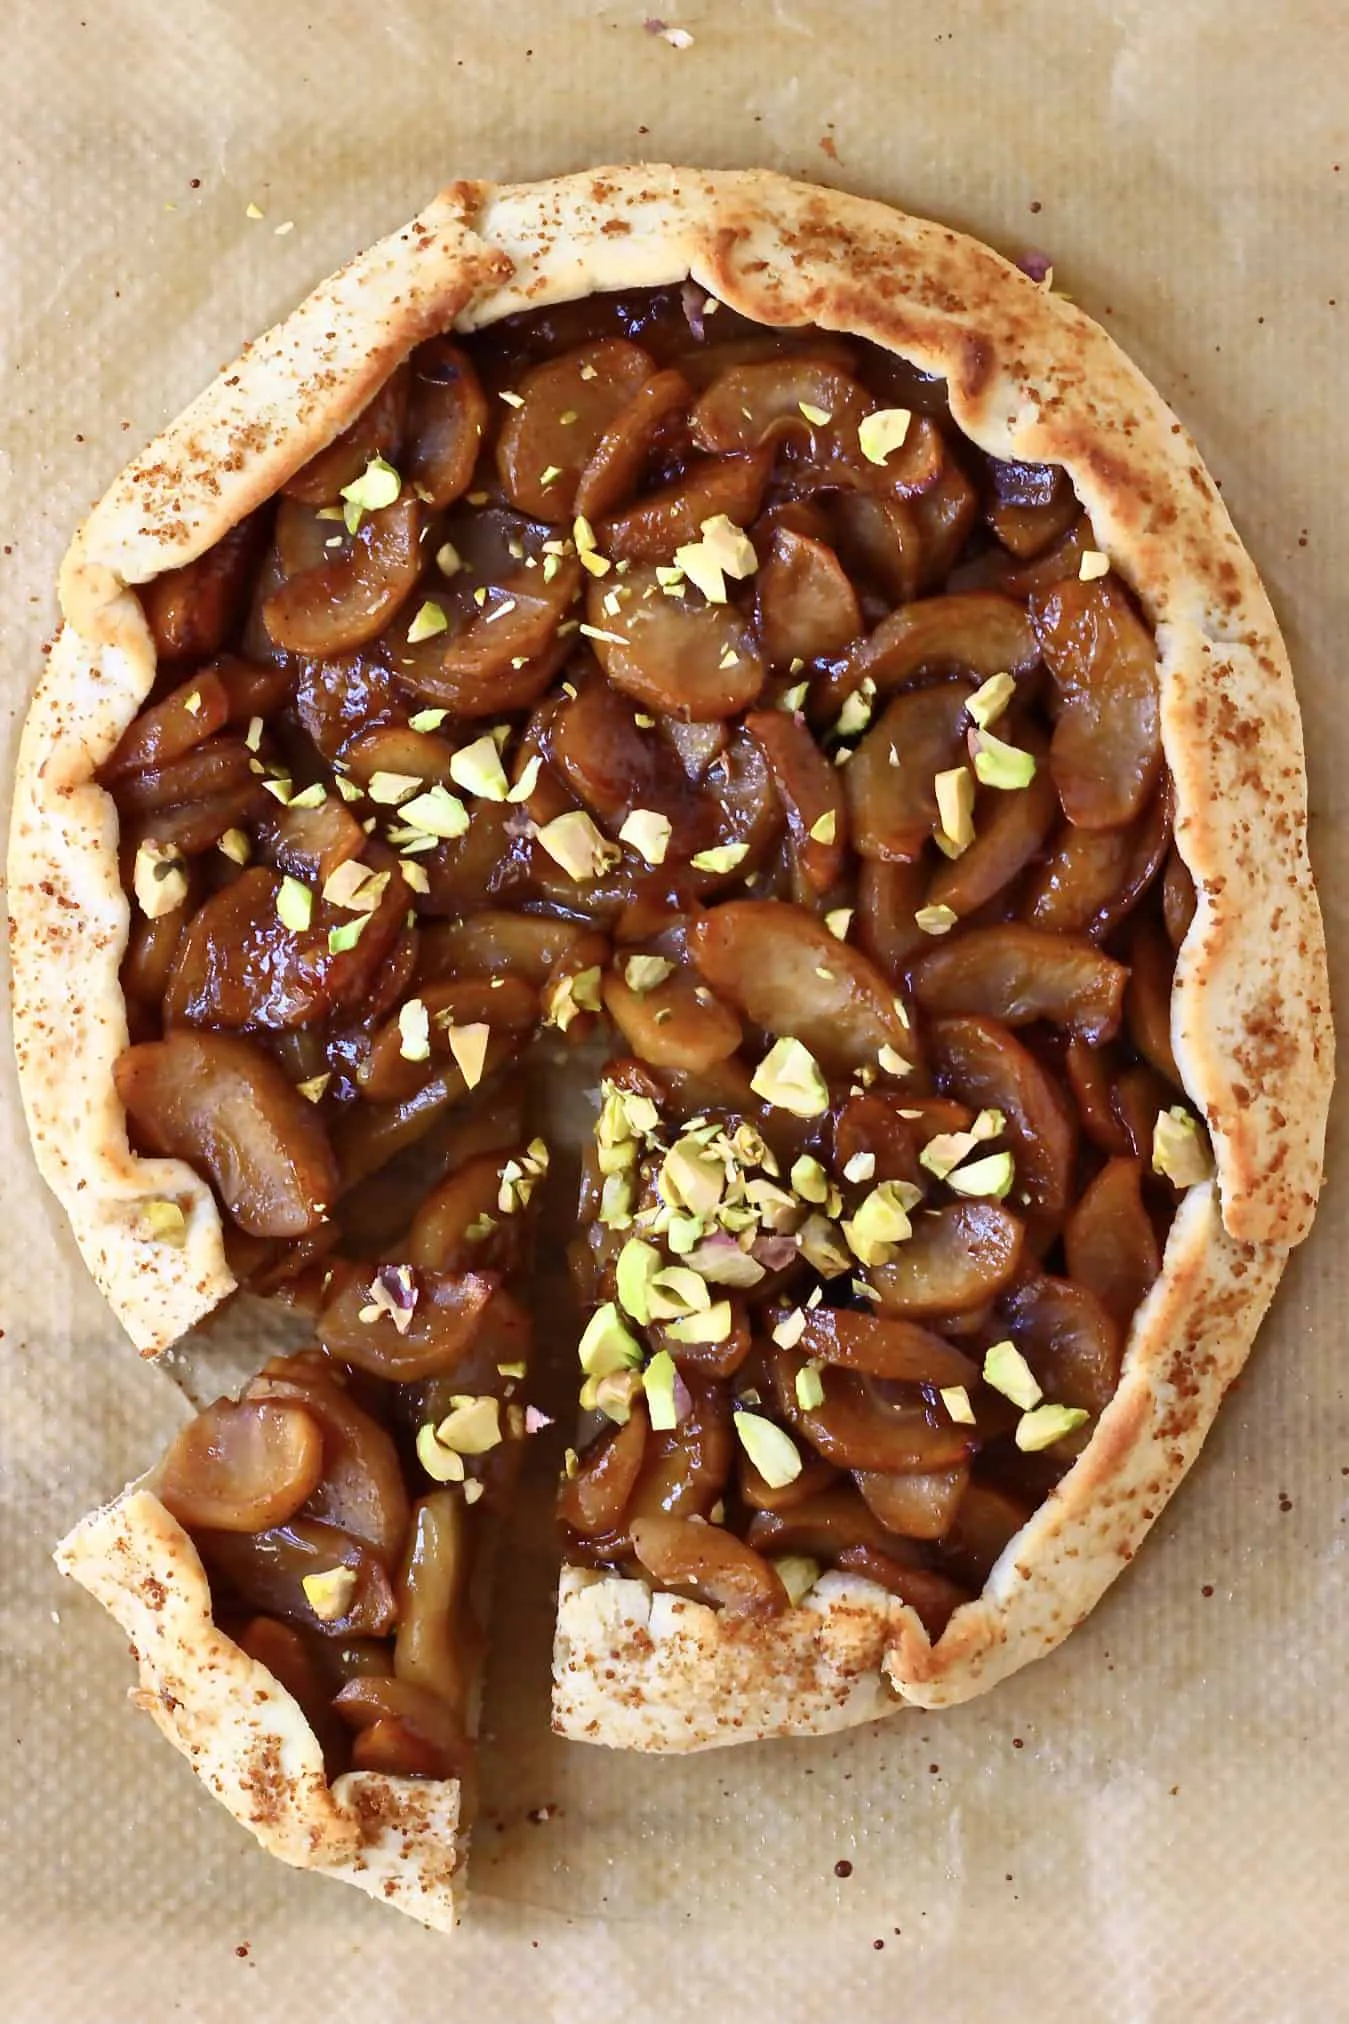 A round galette filled with brown apples sprinkled with pistachio nuts with a slice cut out of it against a sheet of brown baking paper